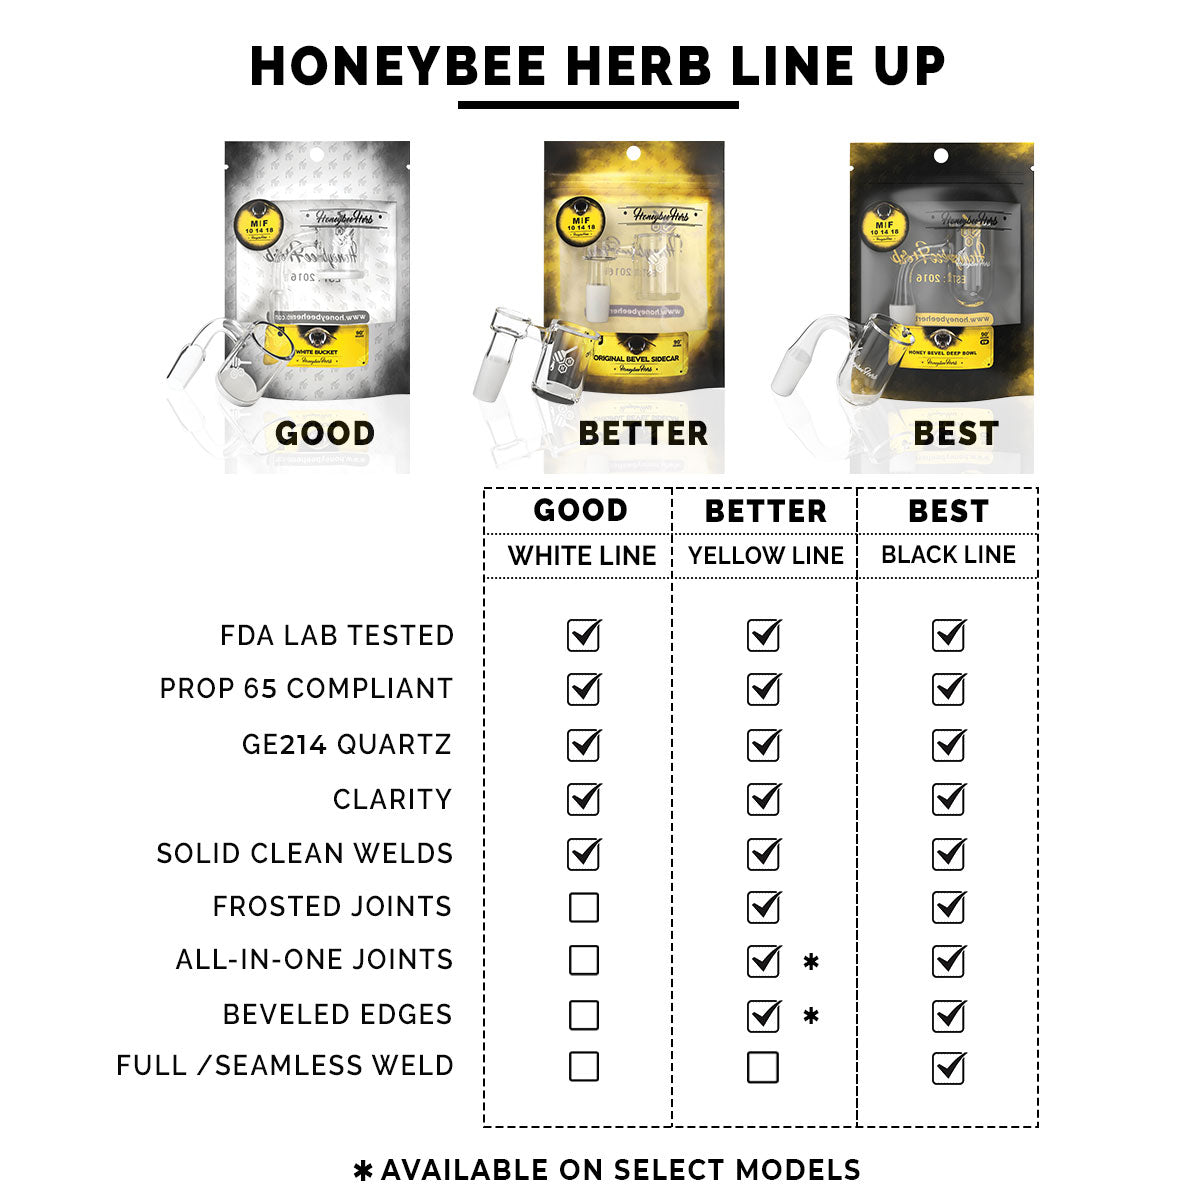 Honeybee Herb line-up chart showing quartz banger quality tiers from good to best